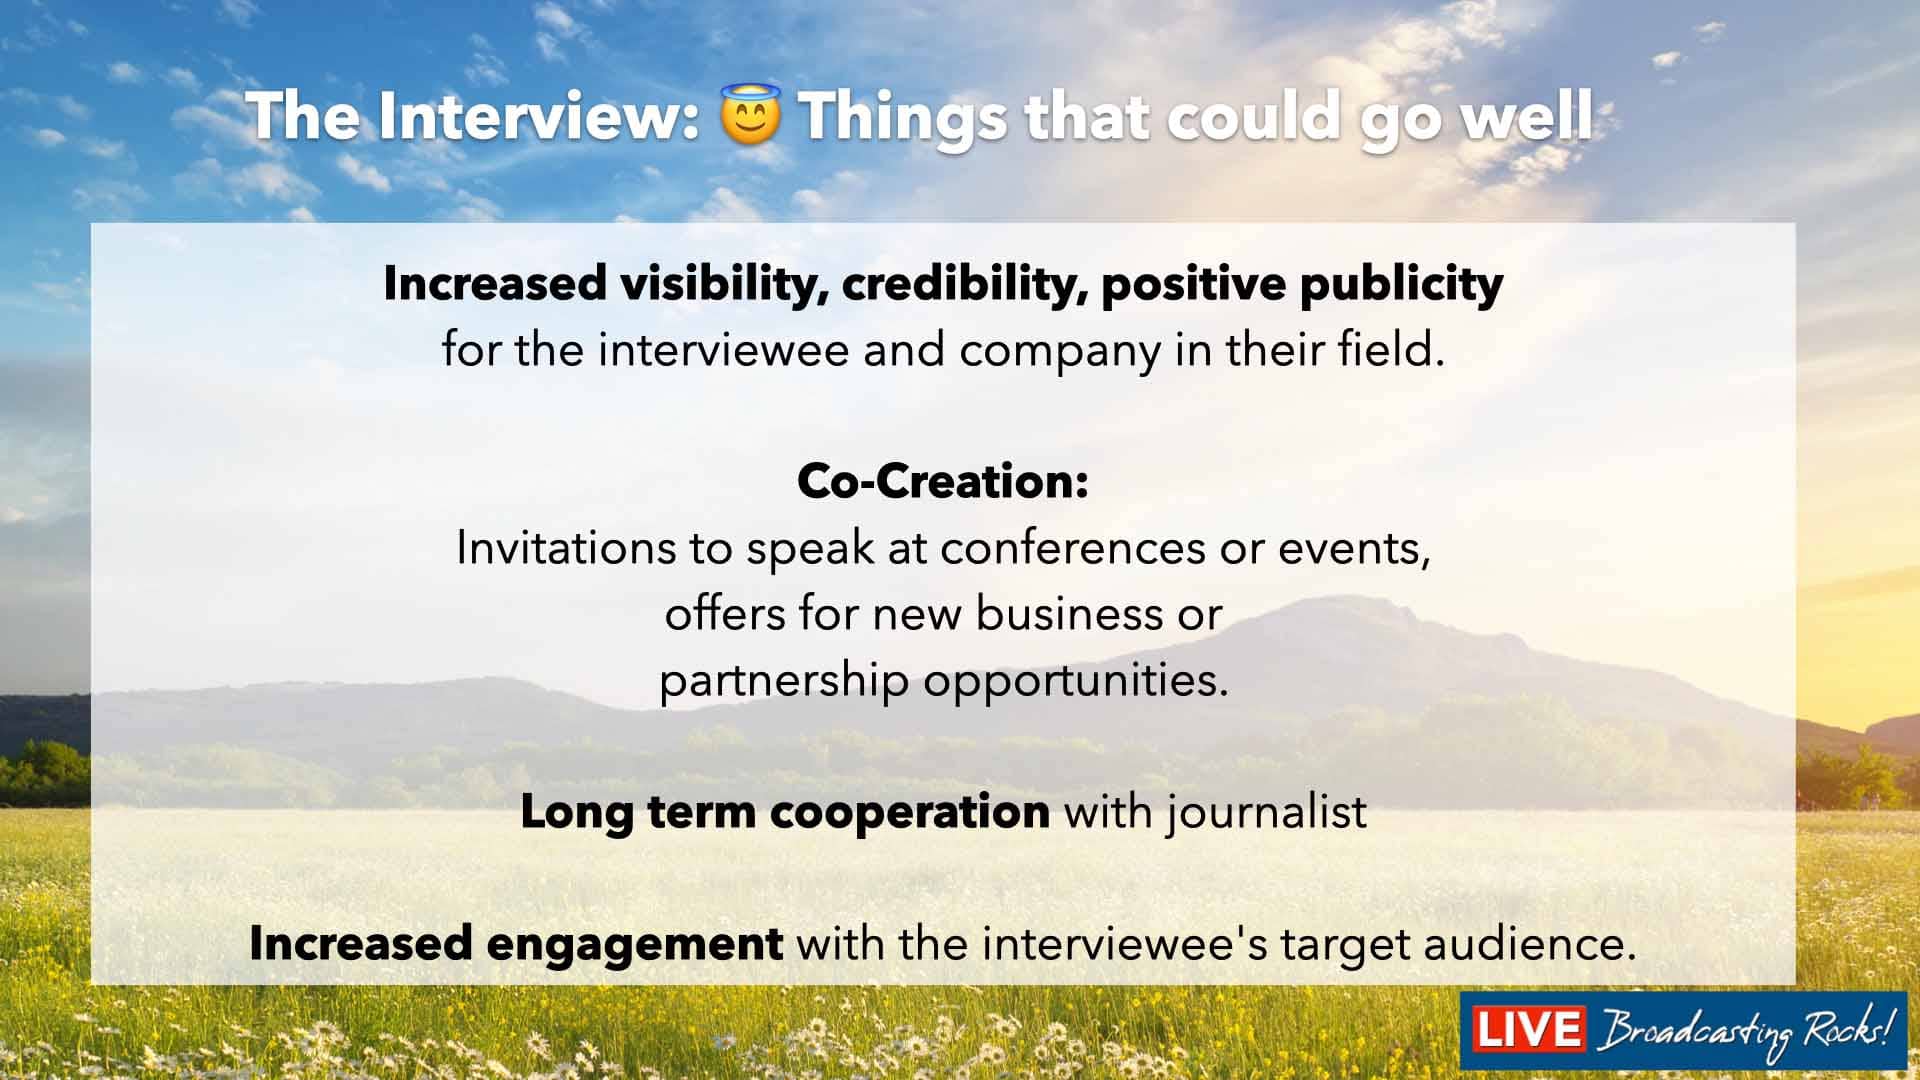 A successful media interview can bring several benefits to both the interviewee and their organization. Here are some of the potential benefits